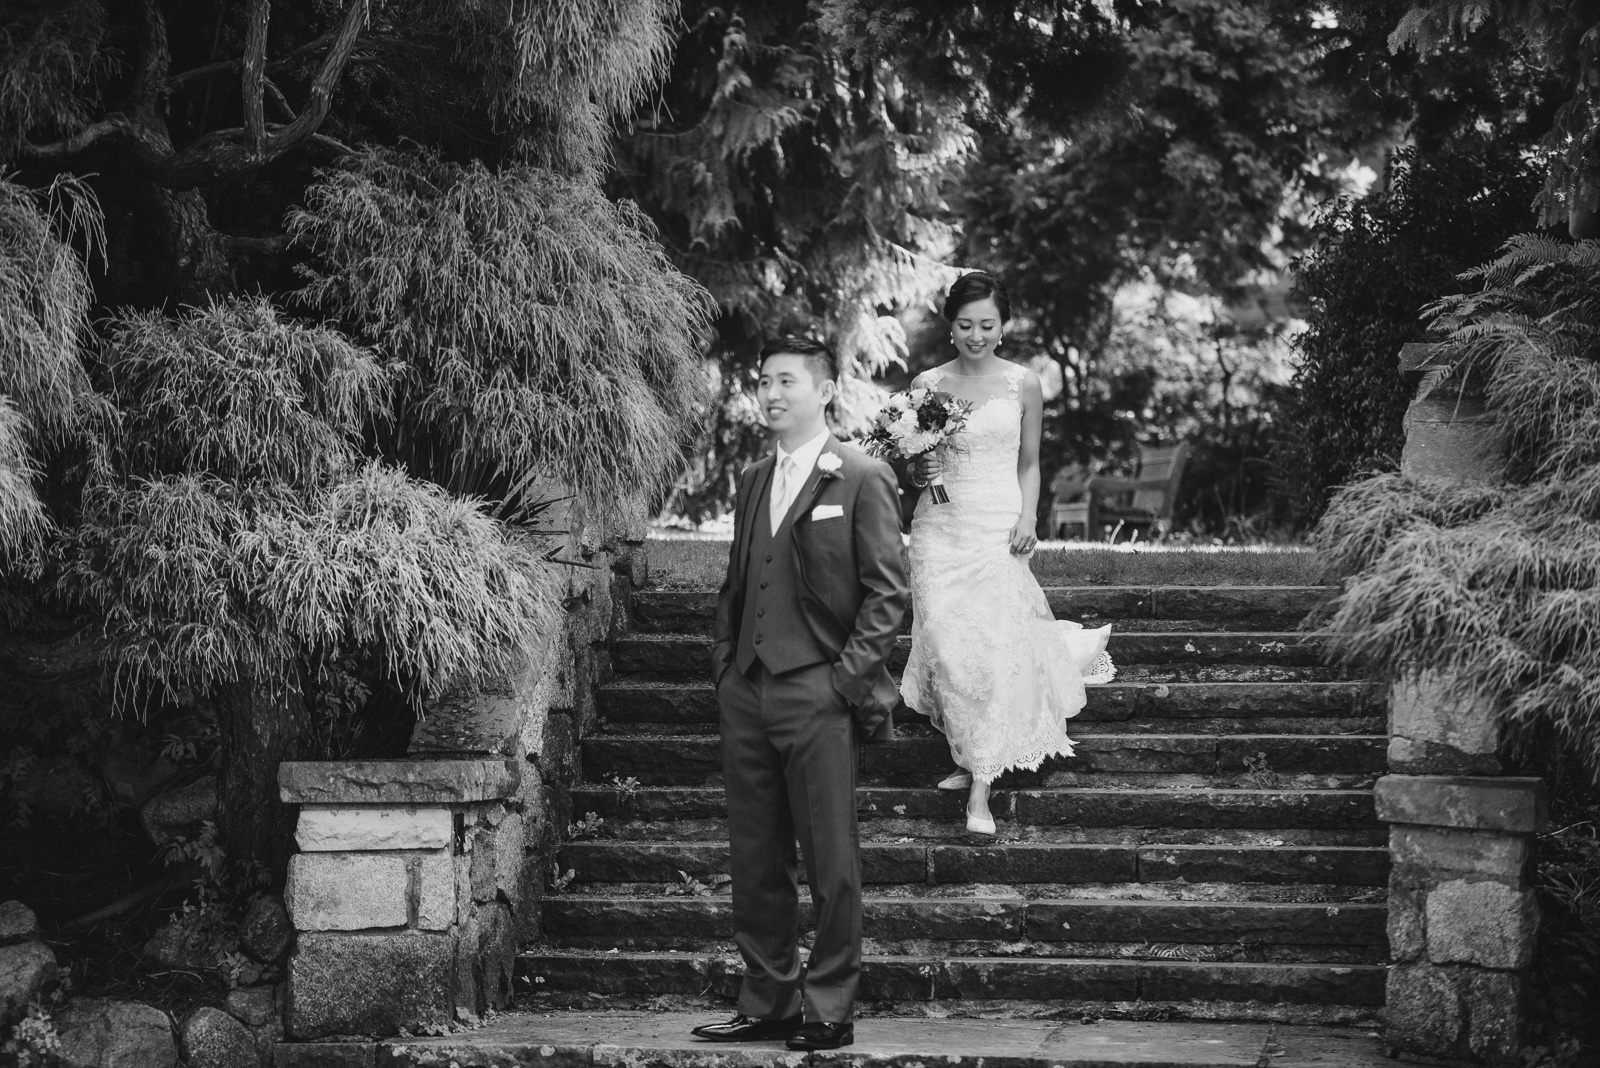 wedding first look at cecil green park house on ubc campus in vancouver - victoria wedding photographers